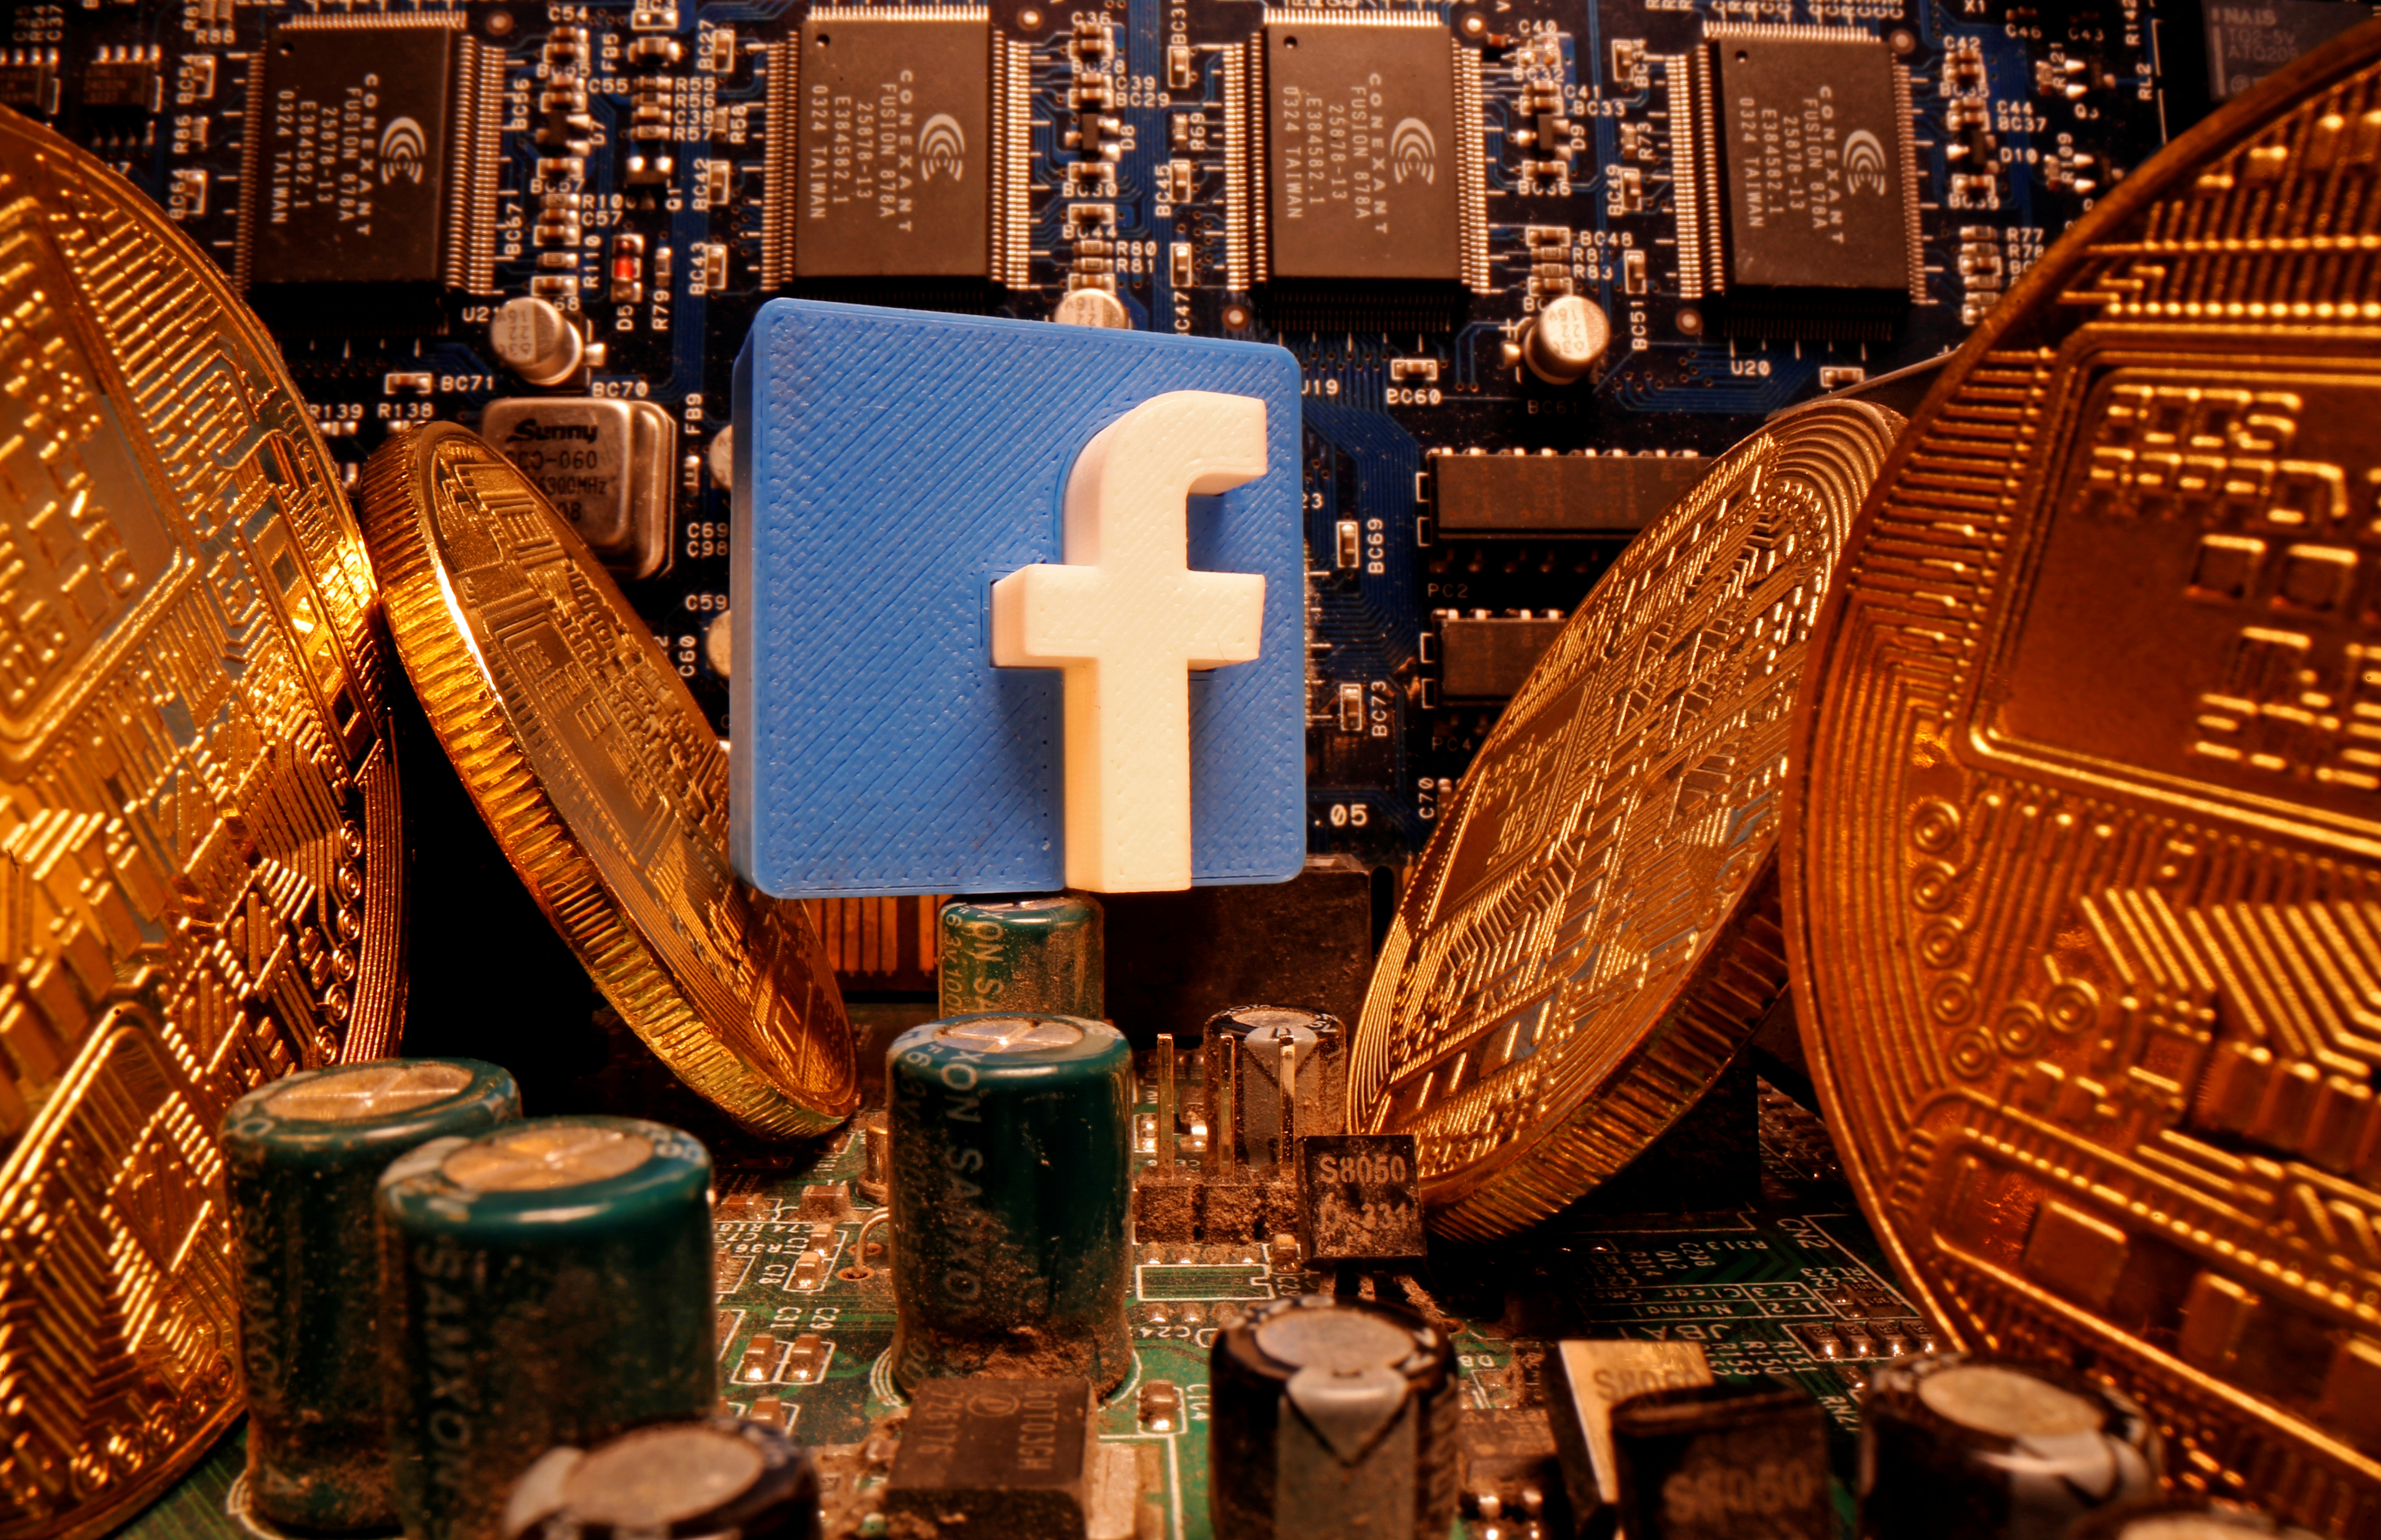 A 3D-printed Facebook logo and representations of cryptocurrency are standing on a motherboard in this picture illustration